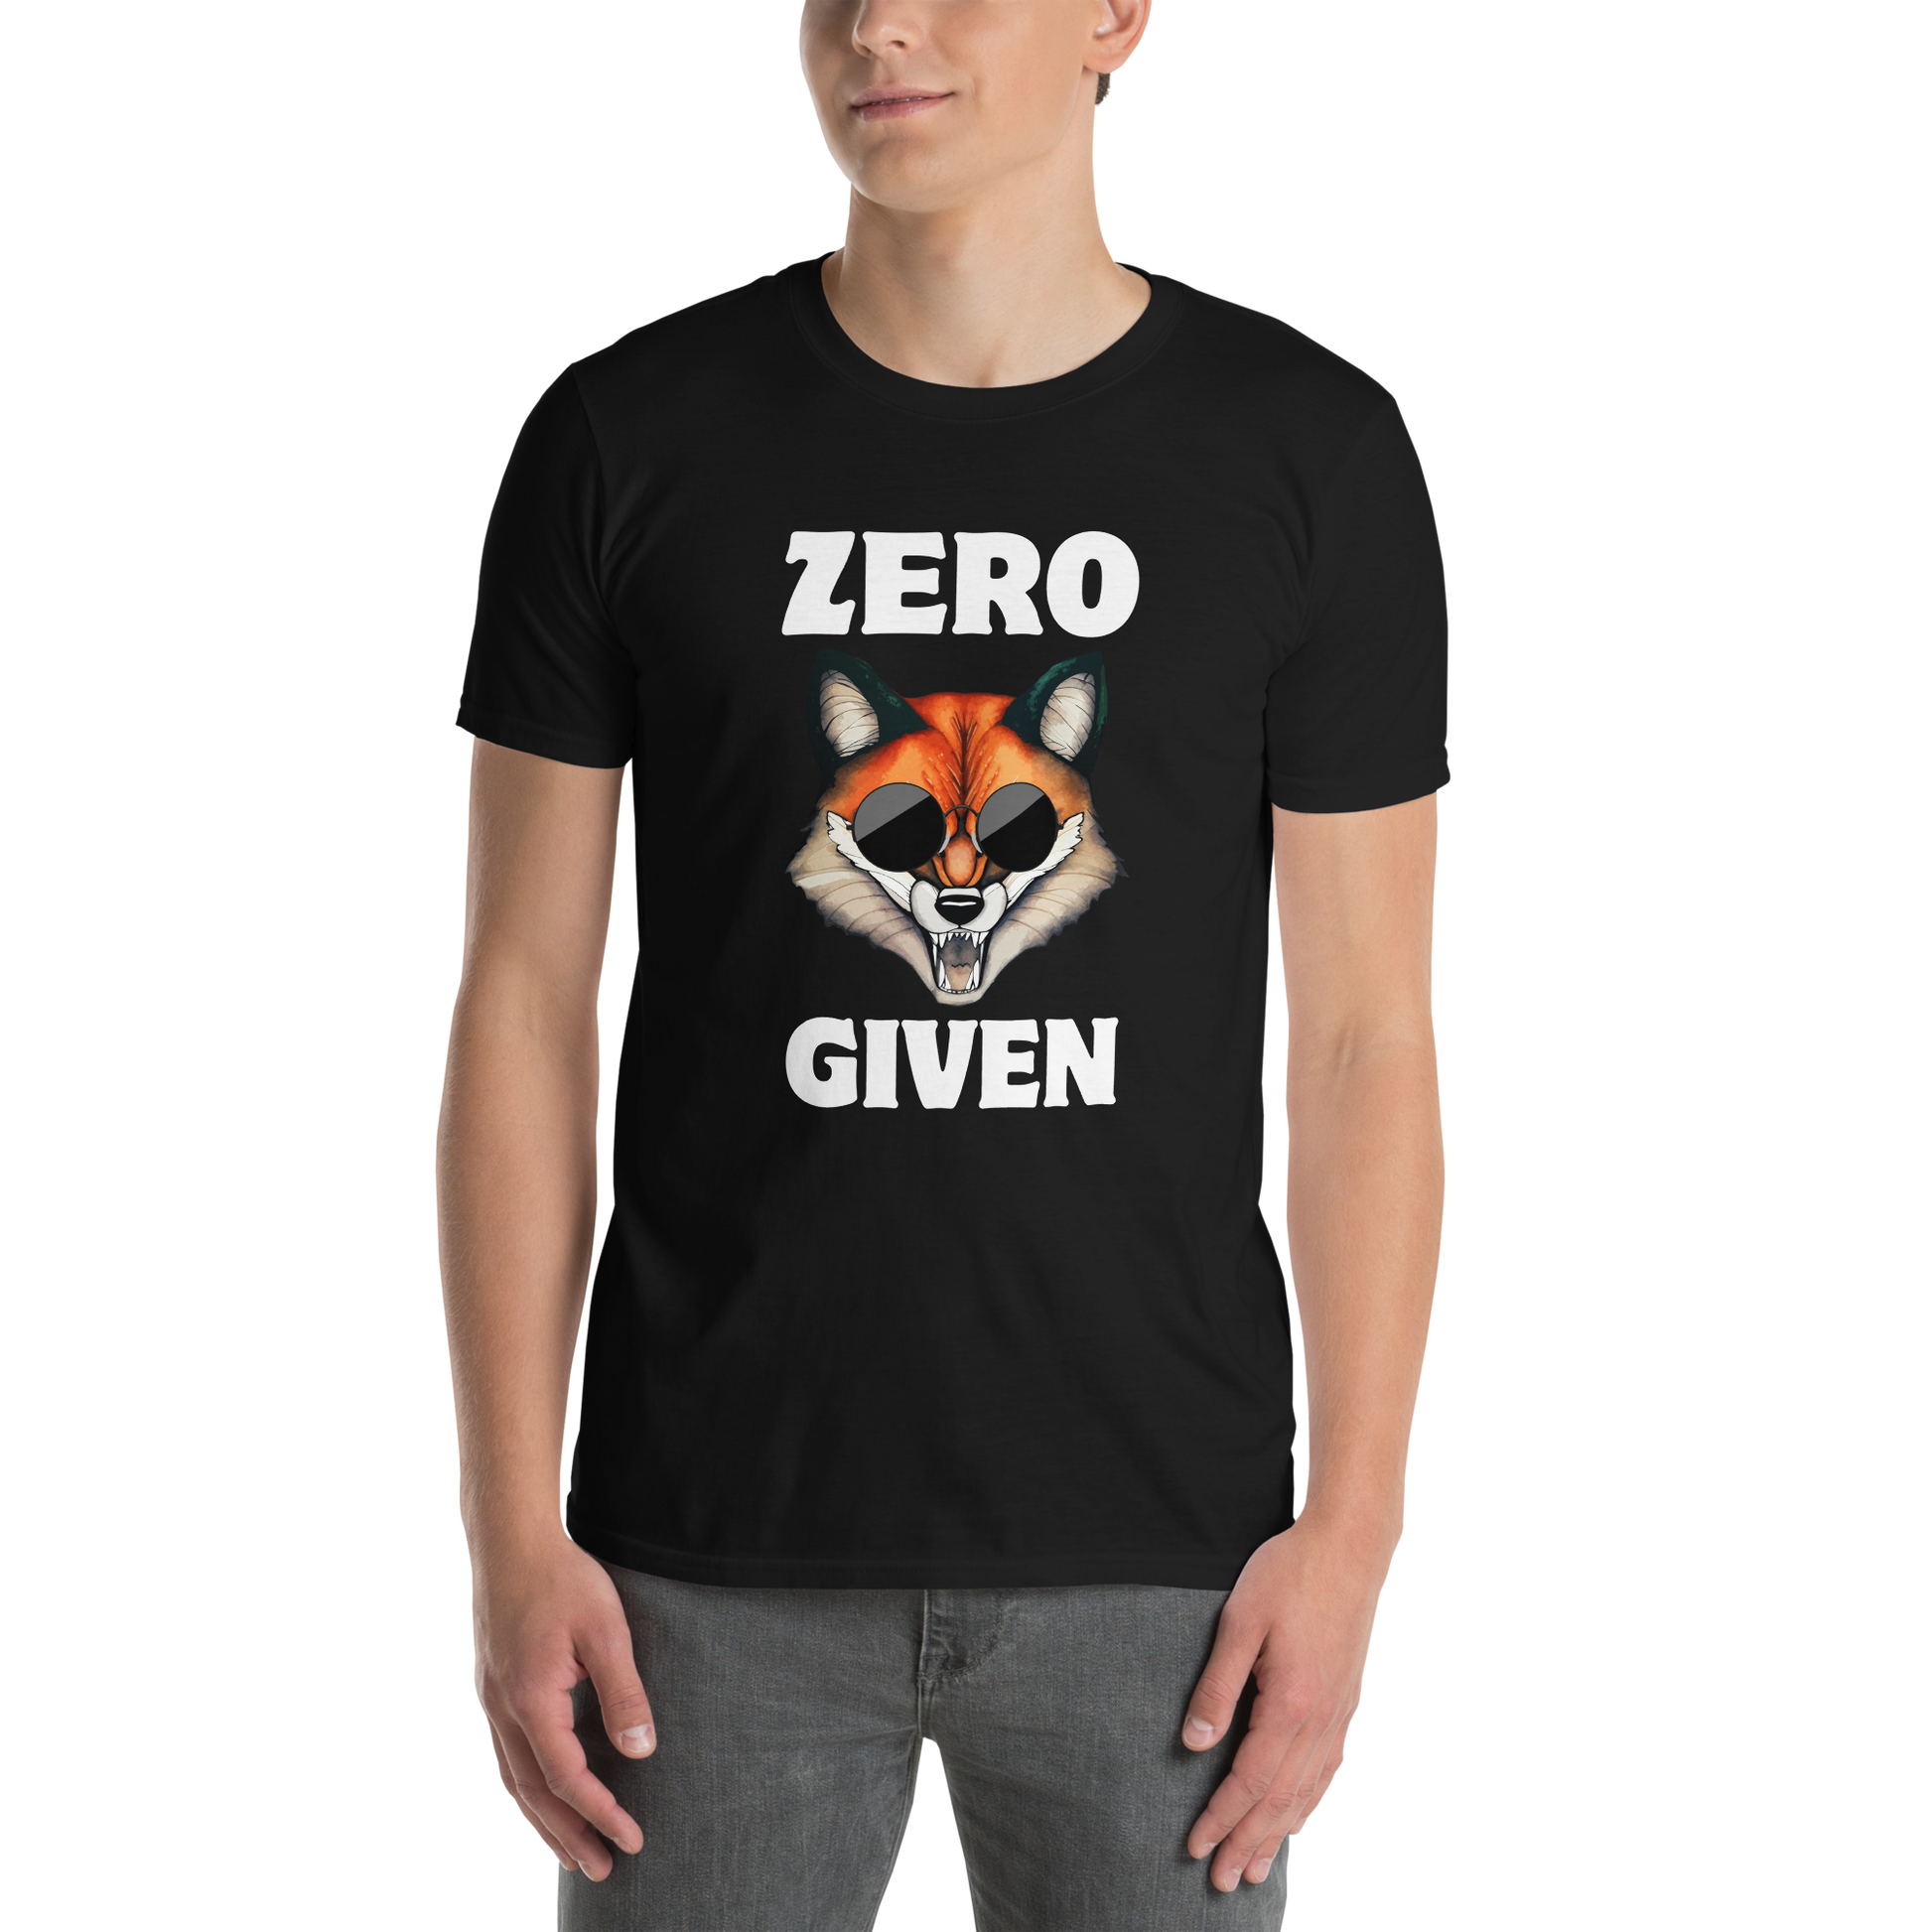 Man wearing a Black Fox T-Shirt featuring a Zero Fox Given graphic on the chest - Funny Graphic Fox T-Shirts - Boozy Fox